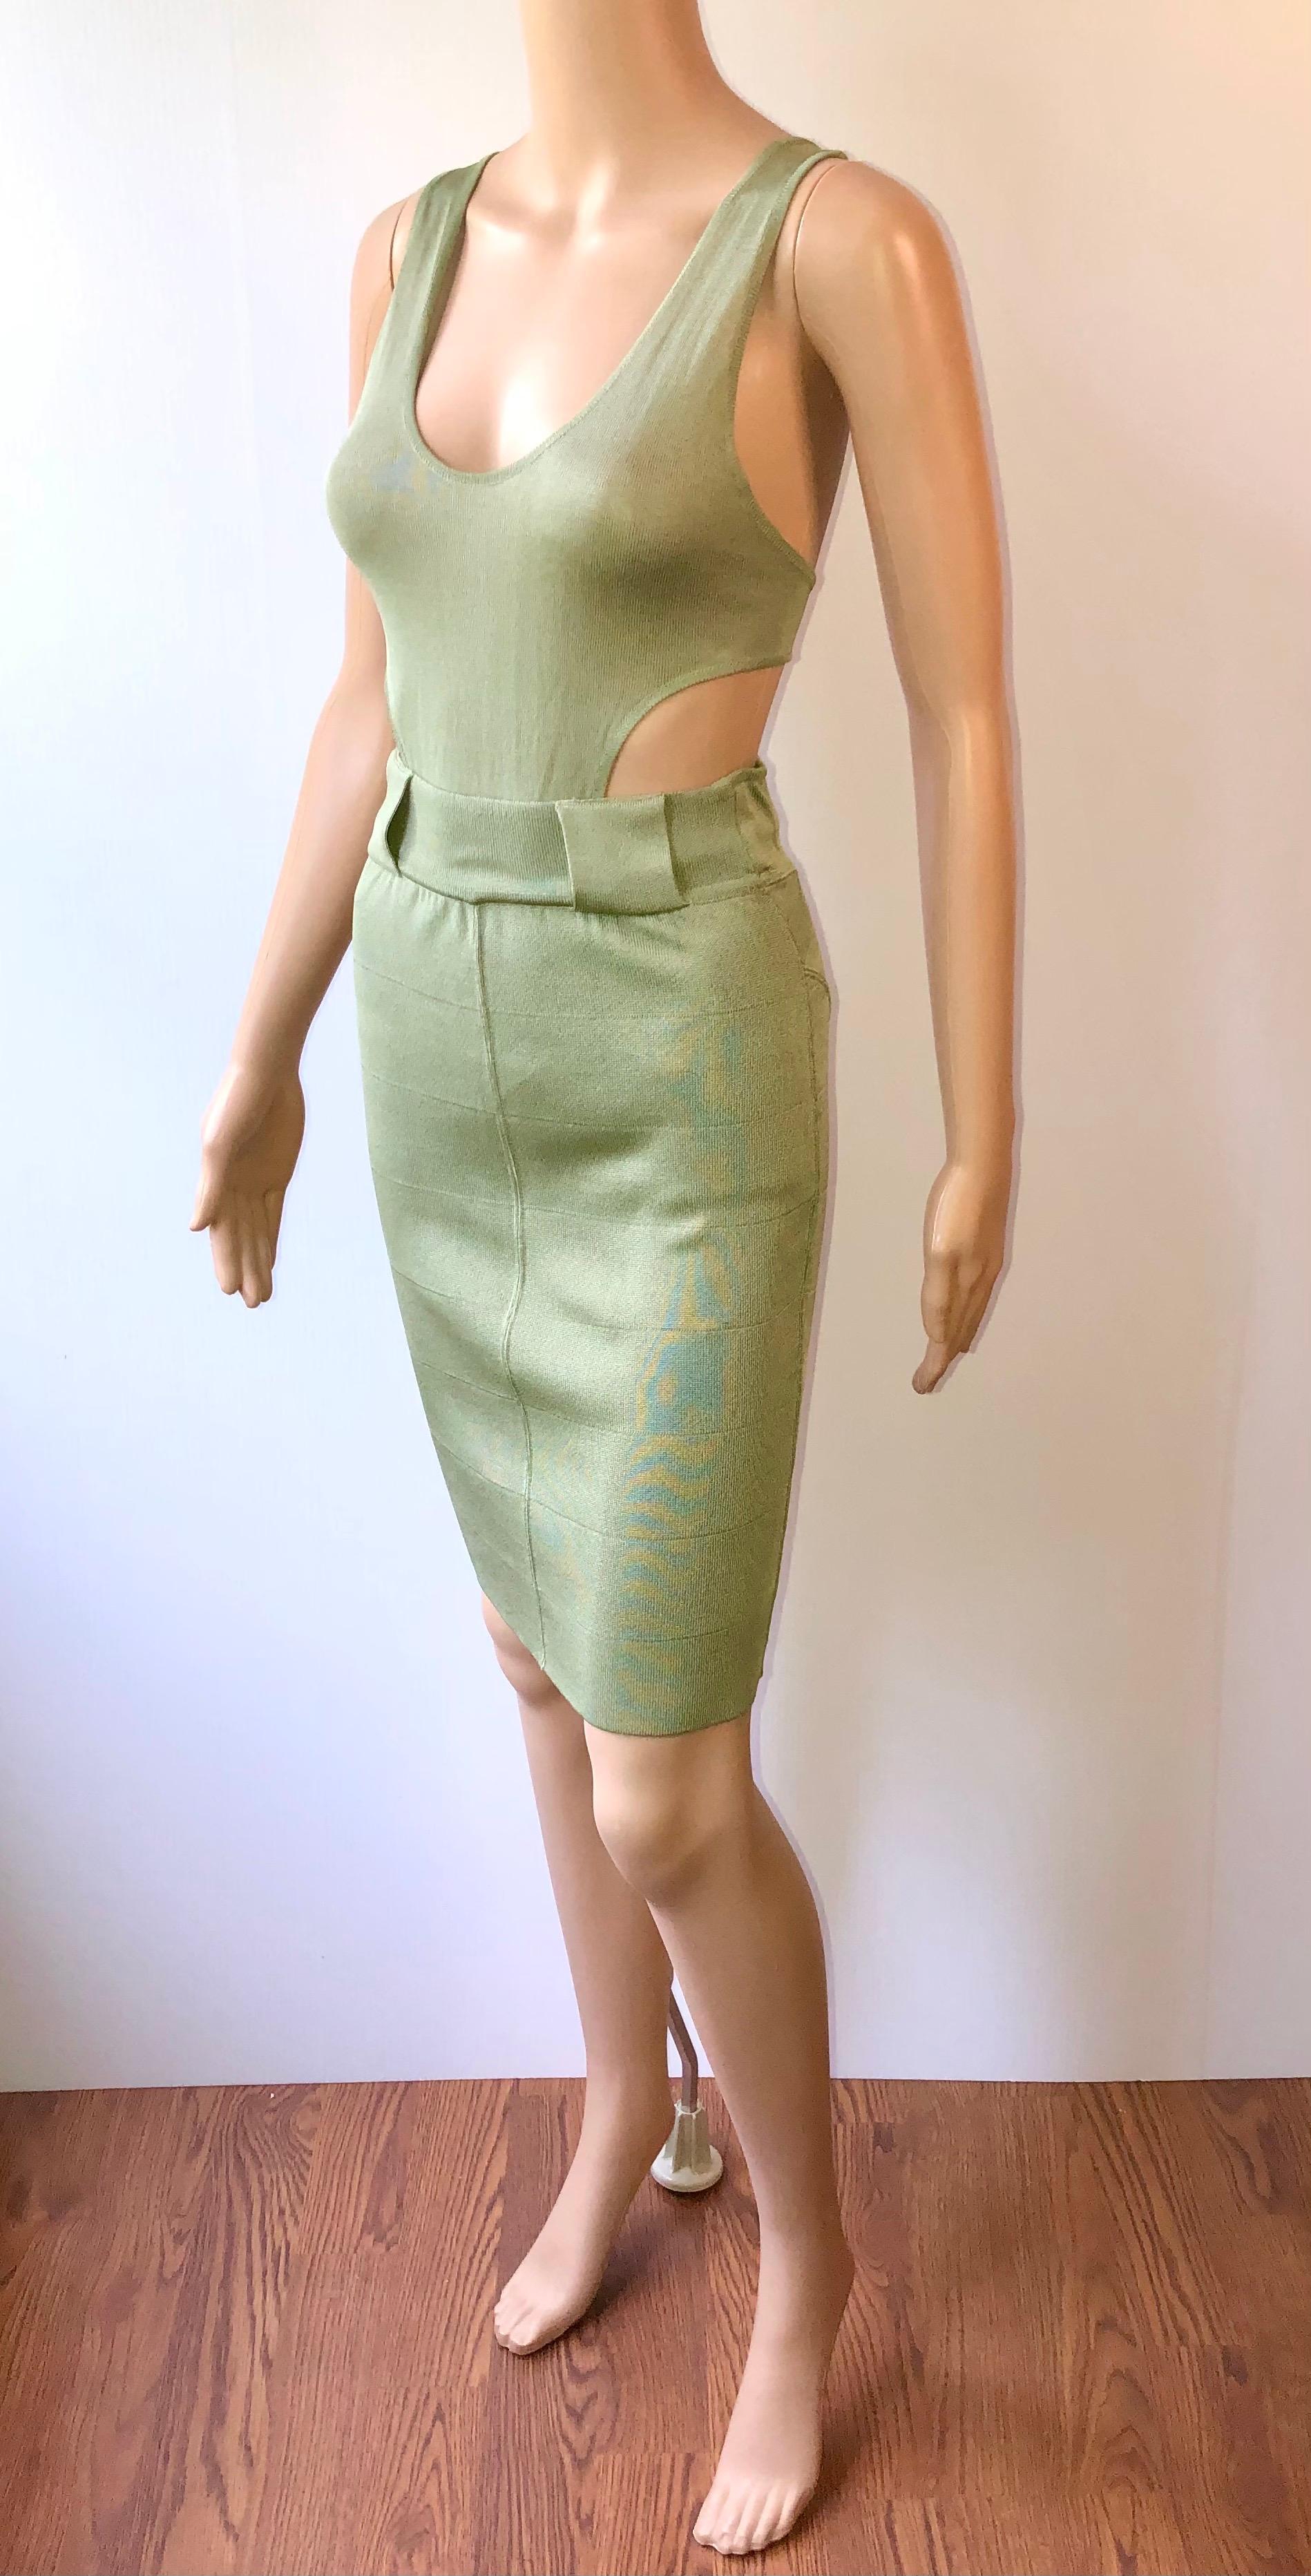 Women's Azzedine Alaia S/S 1985 Vintage Plunged Cutout Bodycon Green Dress For Sale